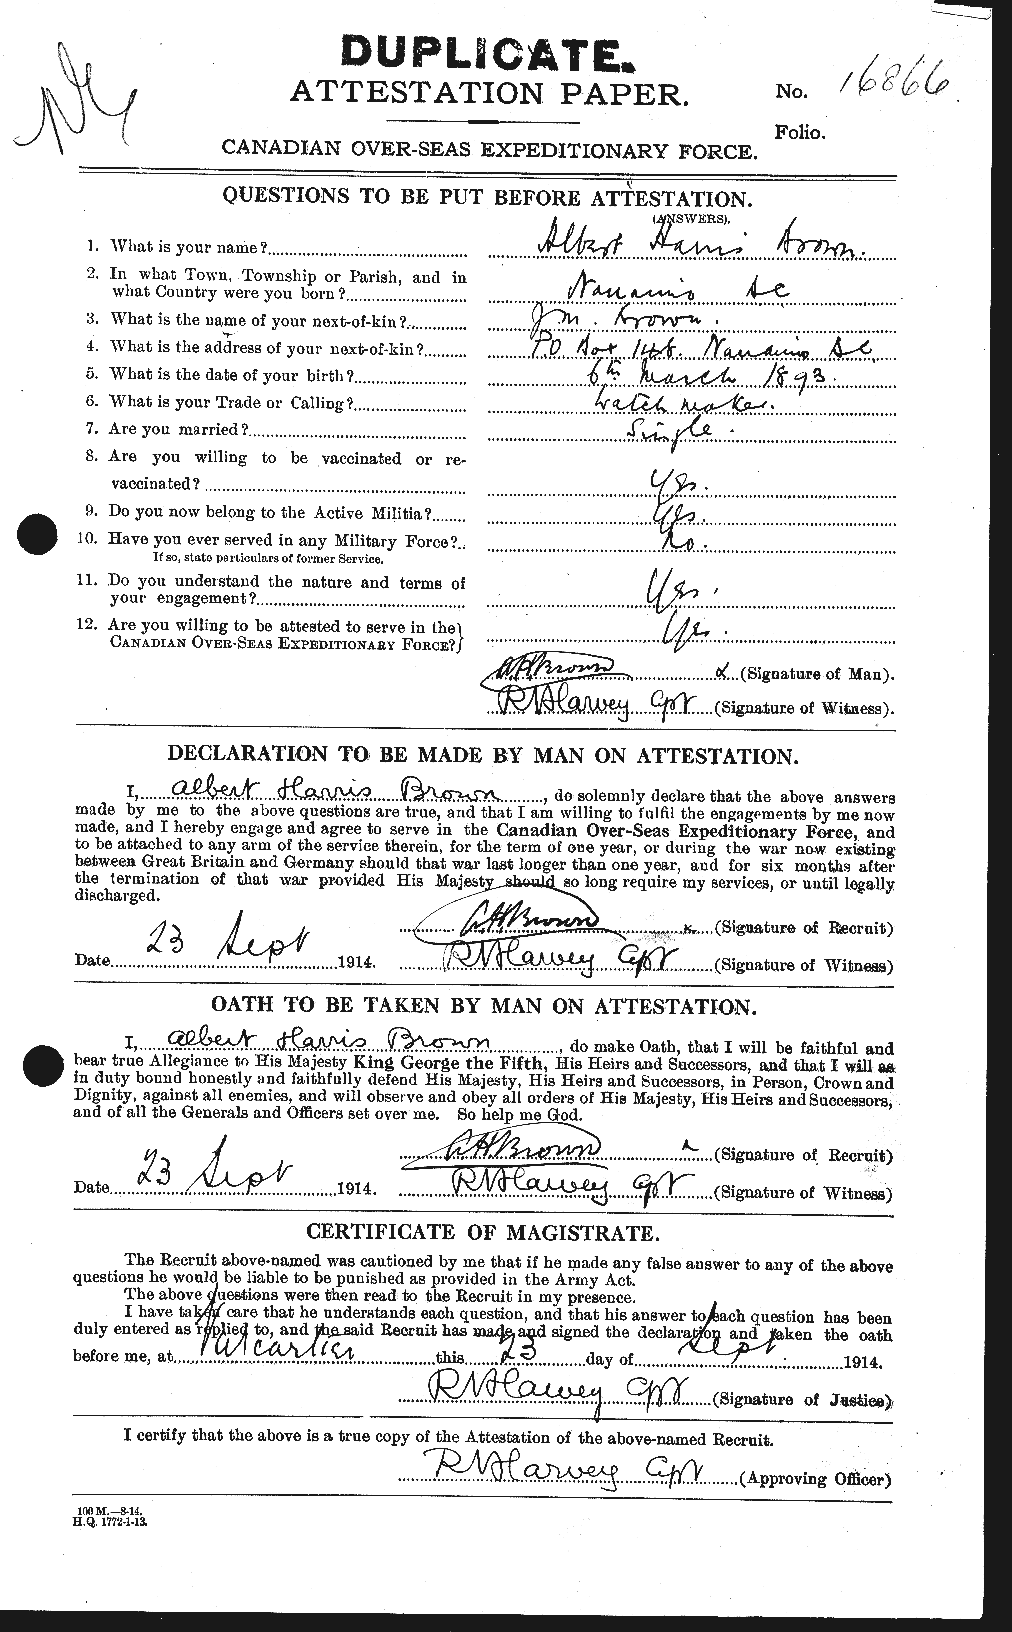 Personnel Records of the First World War - CEF 266916a